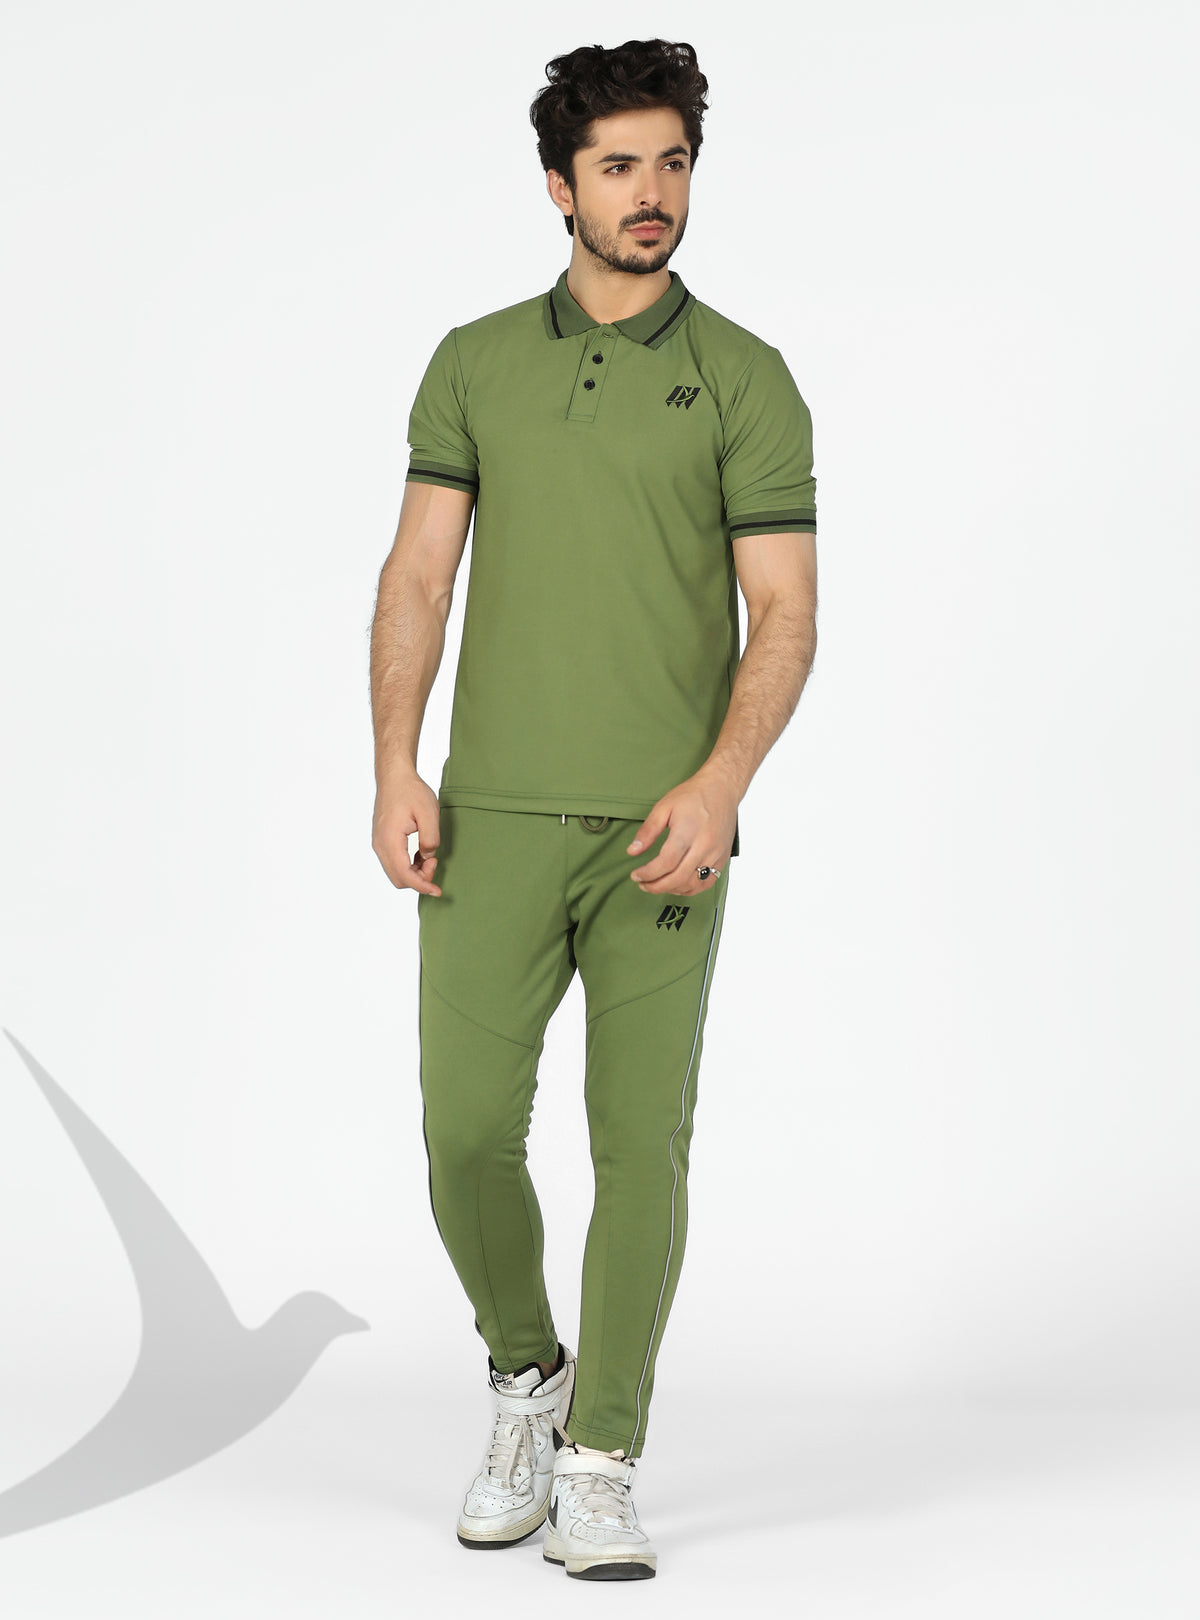 Green trouser with reflective lining